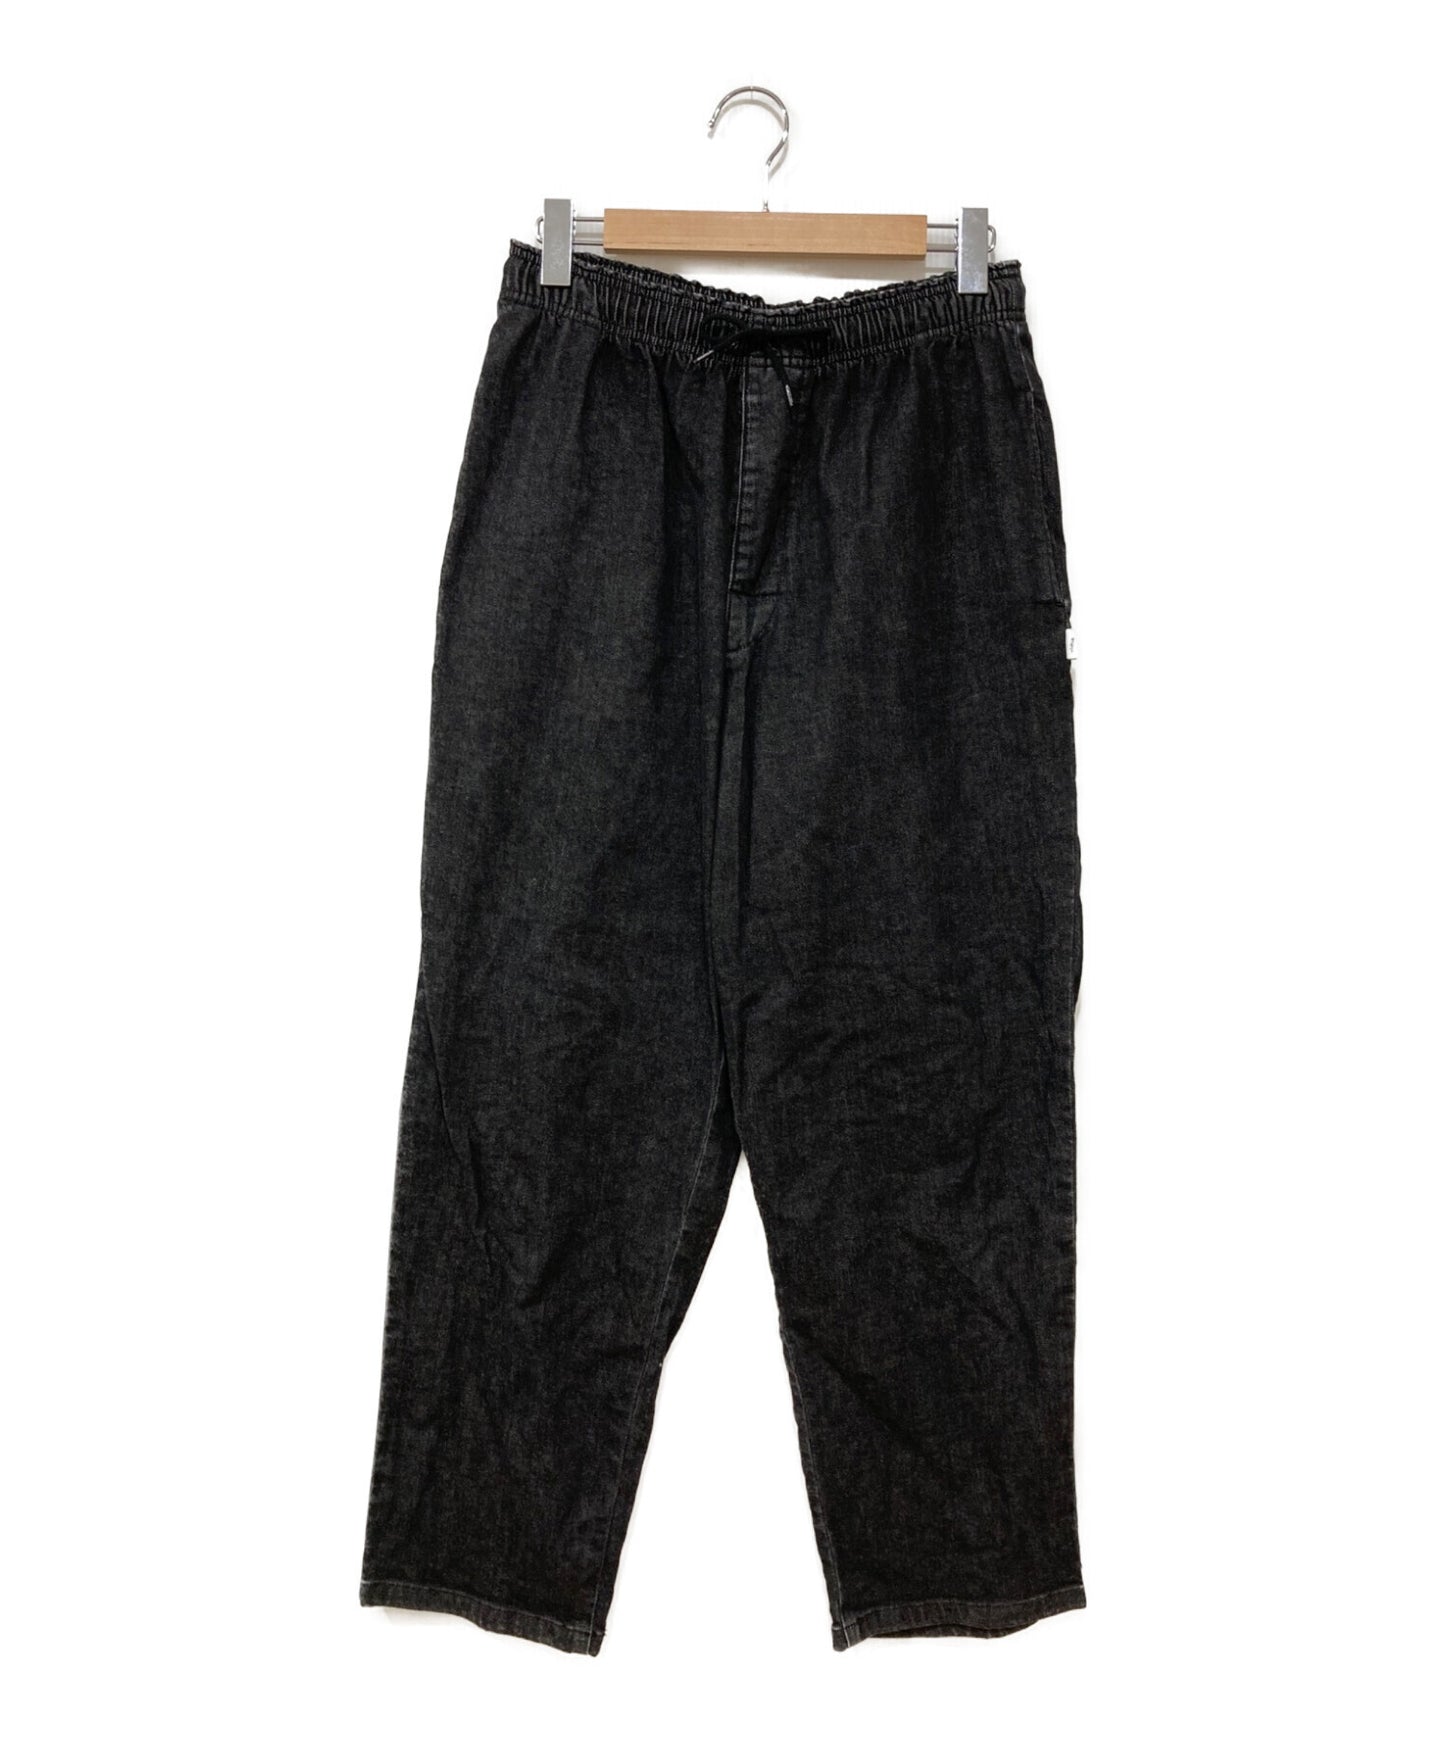 [Pre-owned] WTAPS SEAGULL 01 / TROUSERS / COTTON. den easy pants trouser pants 222wvdt-ptm03